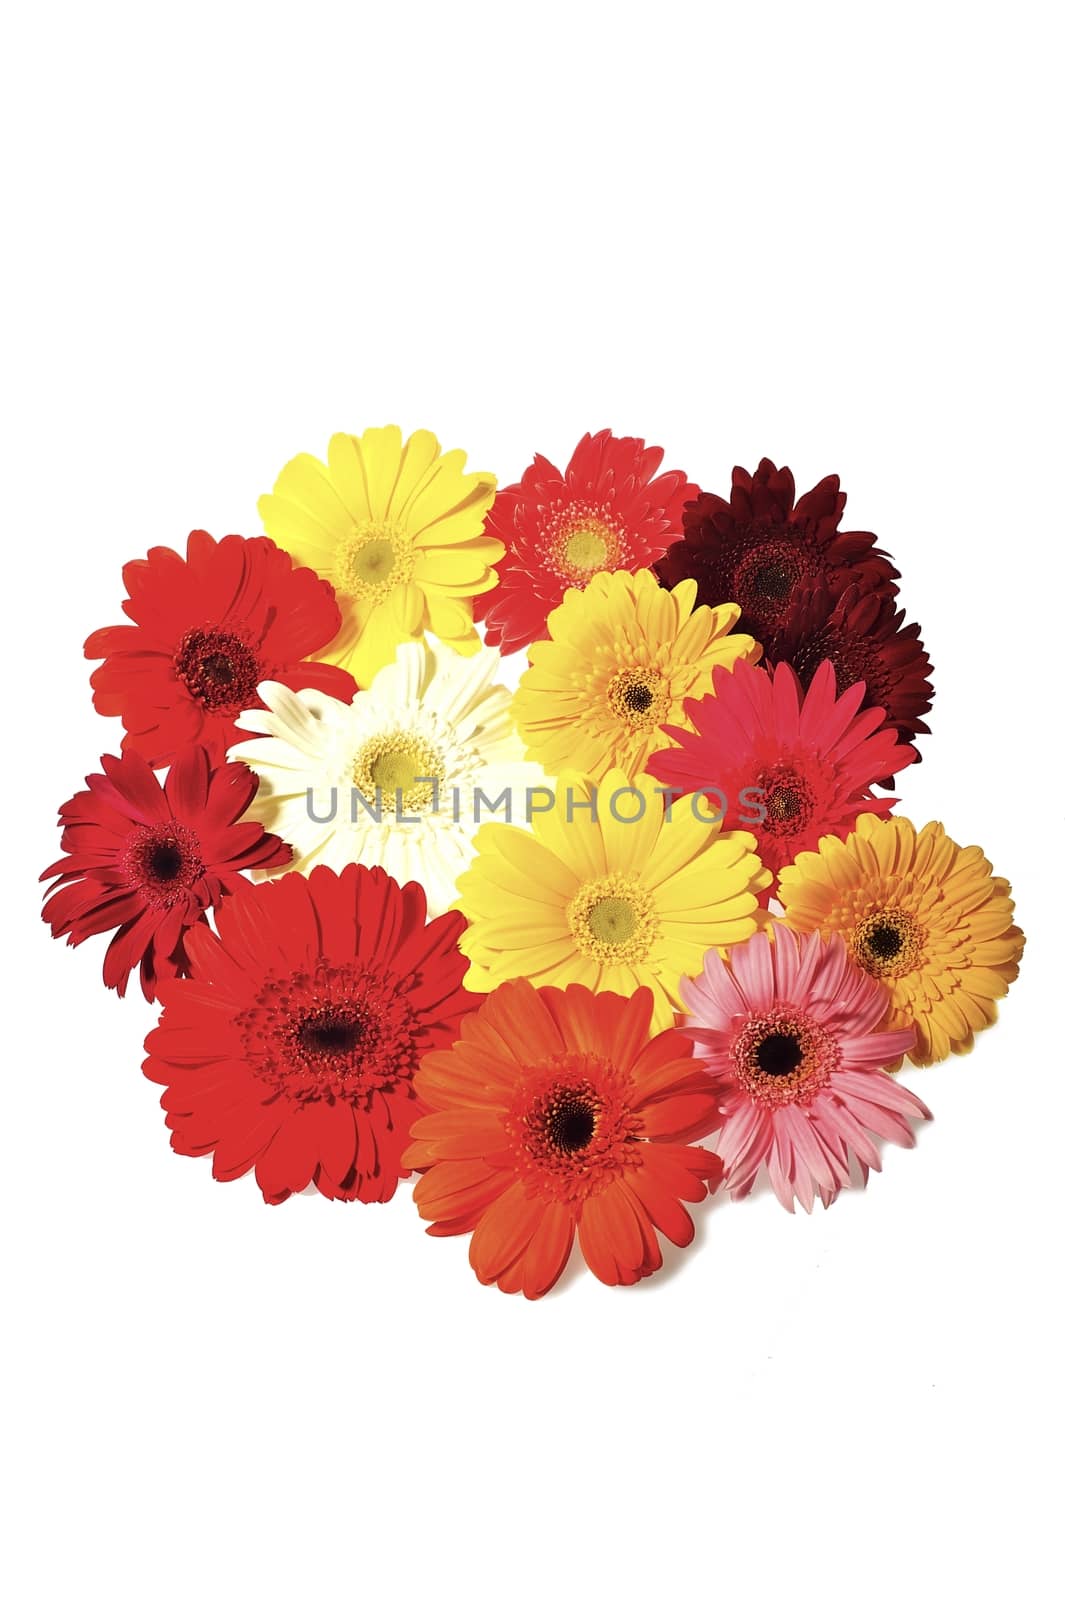 Fresh Cut Gerberas Bouquet - Solid White Background. Clipped Photo.